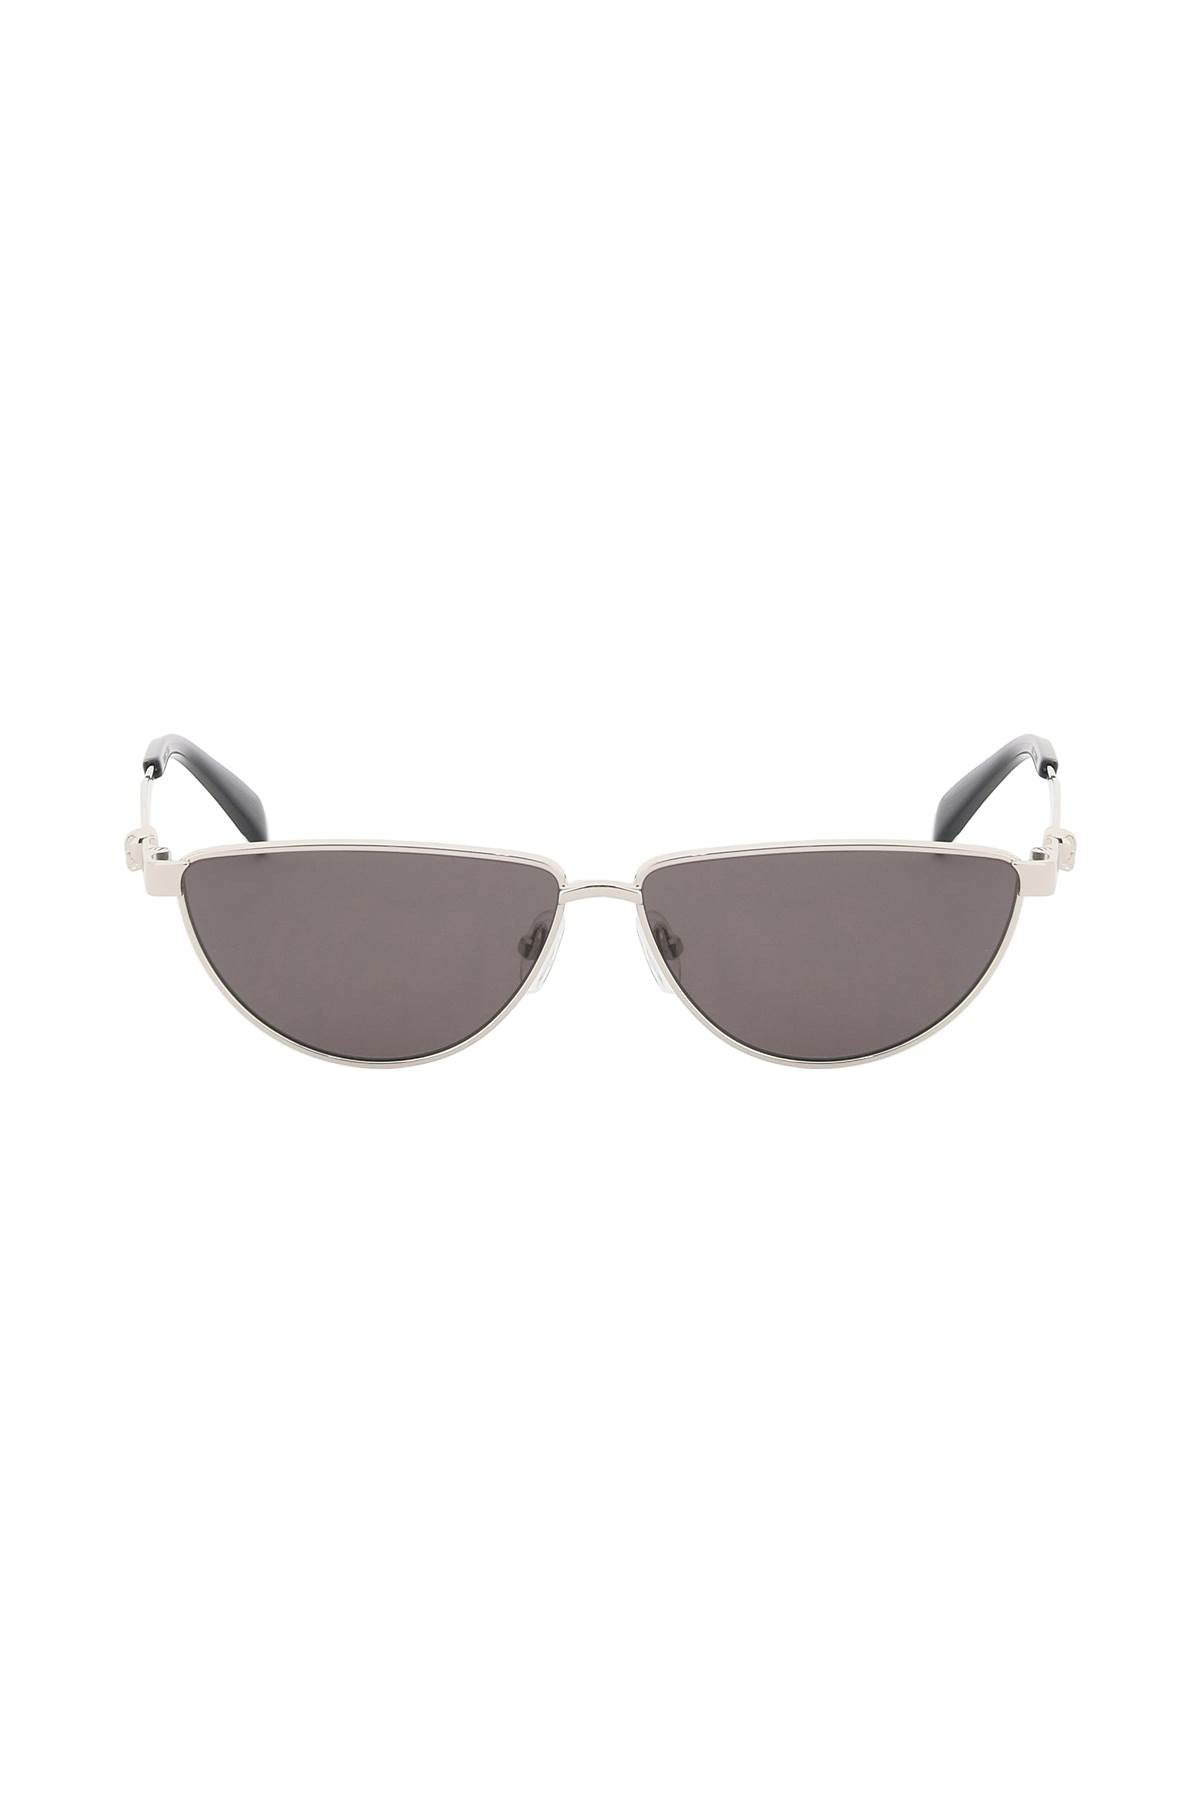 "skull detail sunglasses with sun protection